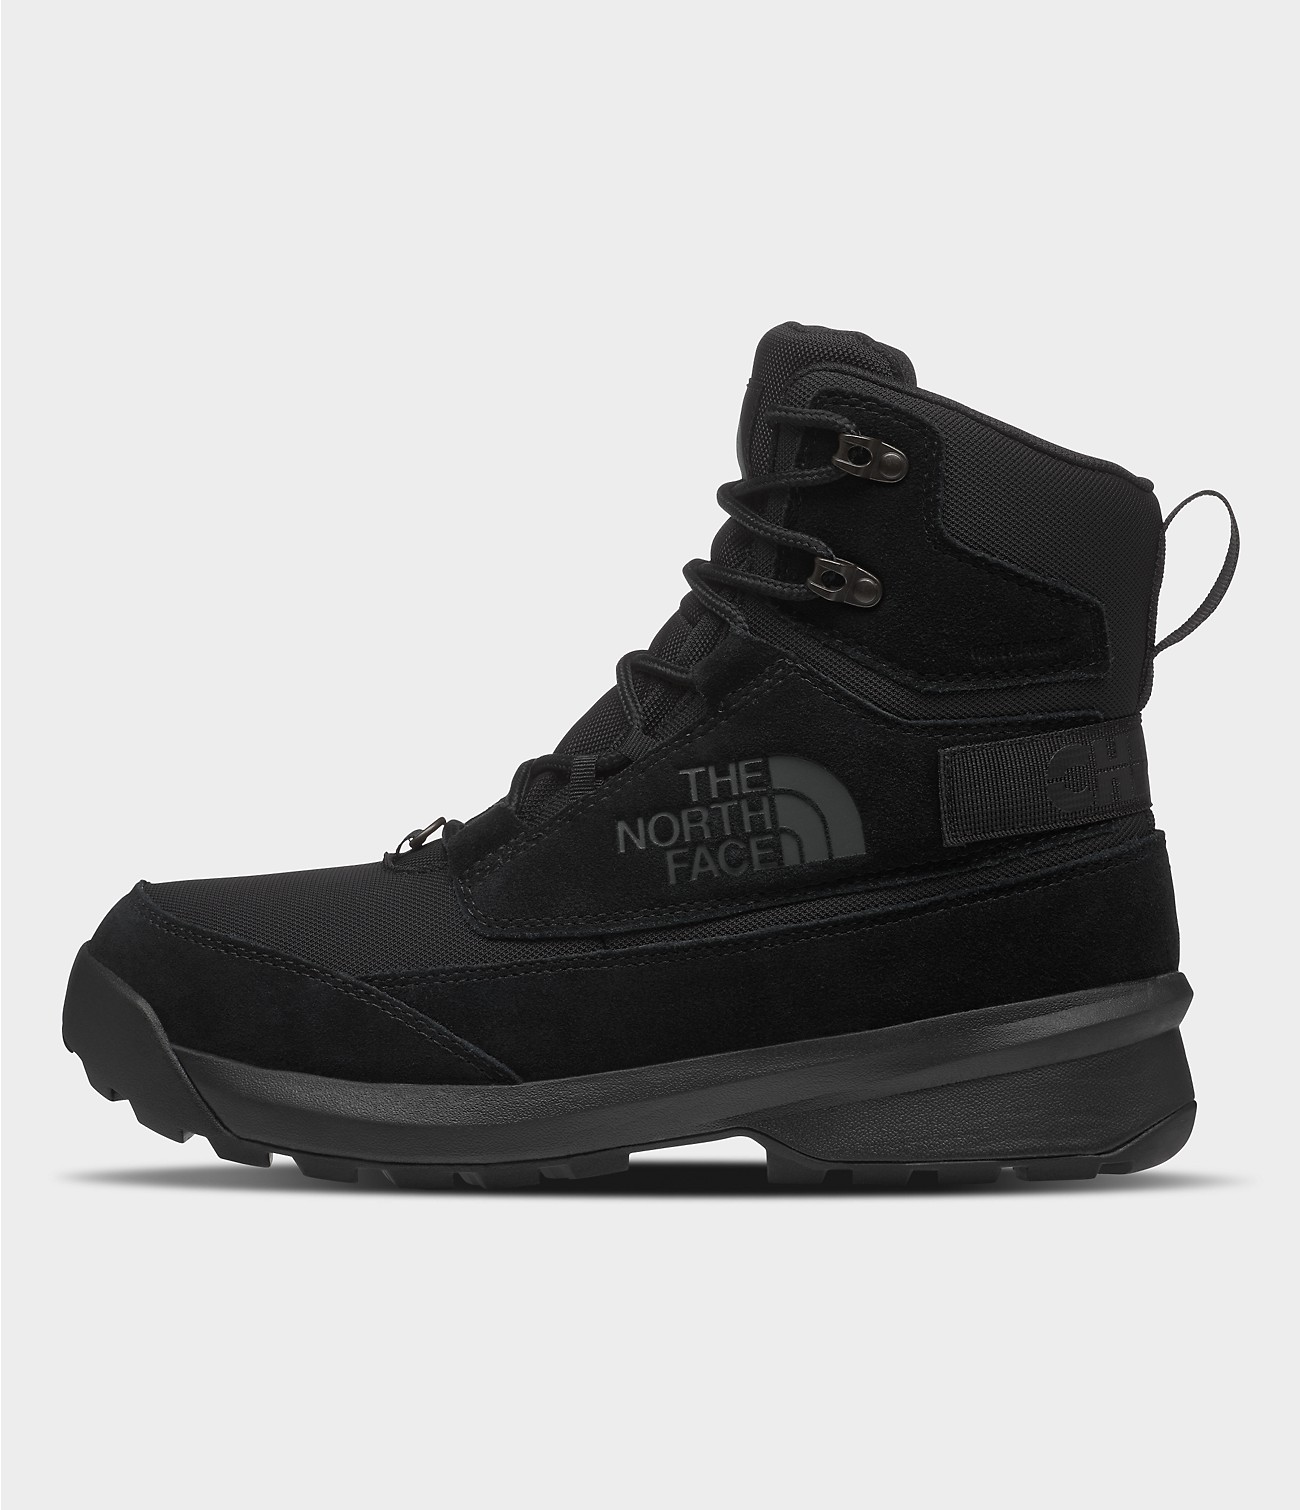 Unlock Wilderness' choice in the Timberland Vs North Face comparison, the Chilkat V Cognito Waterproof Boots by The North Face